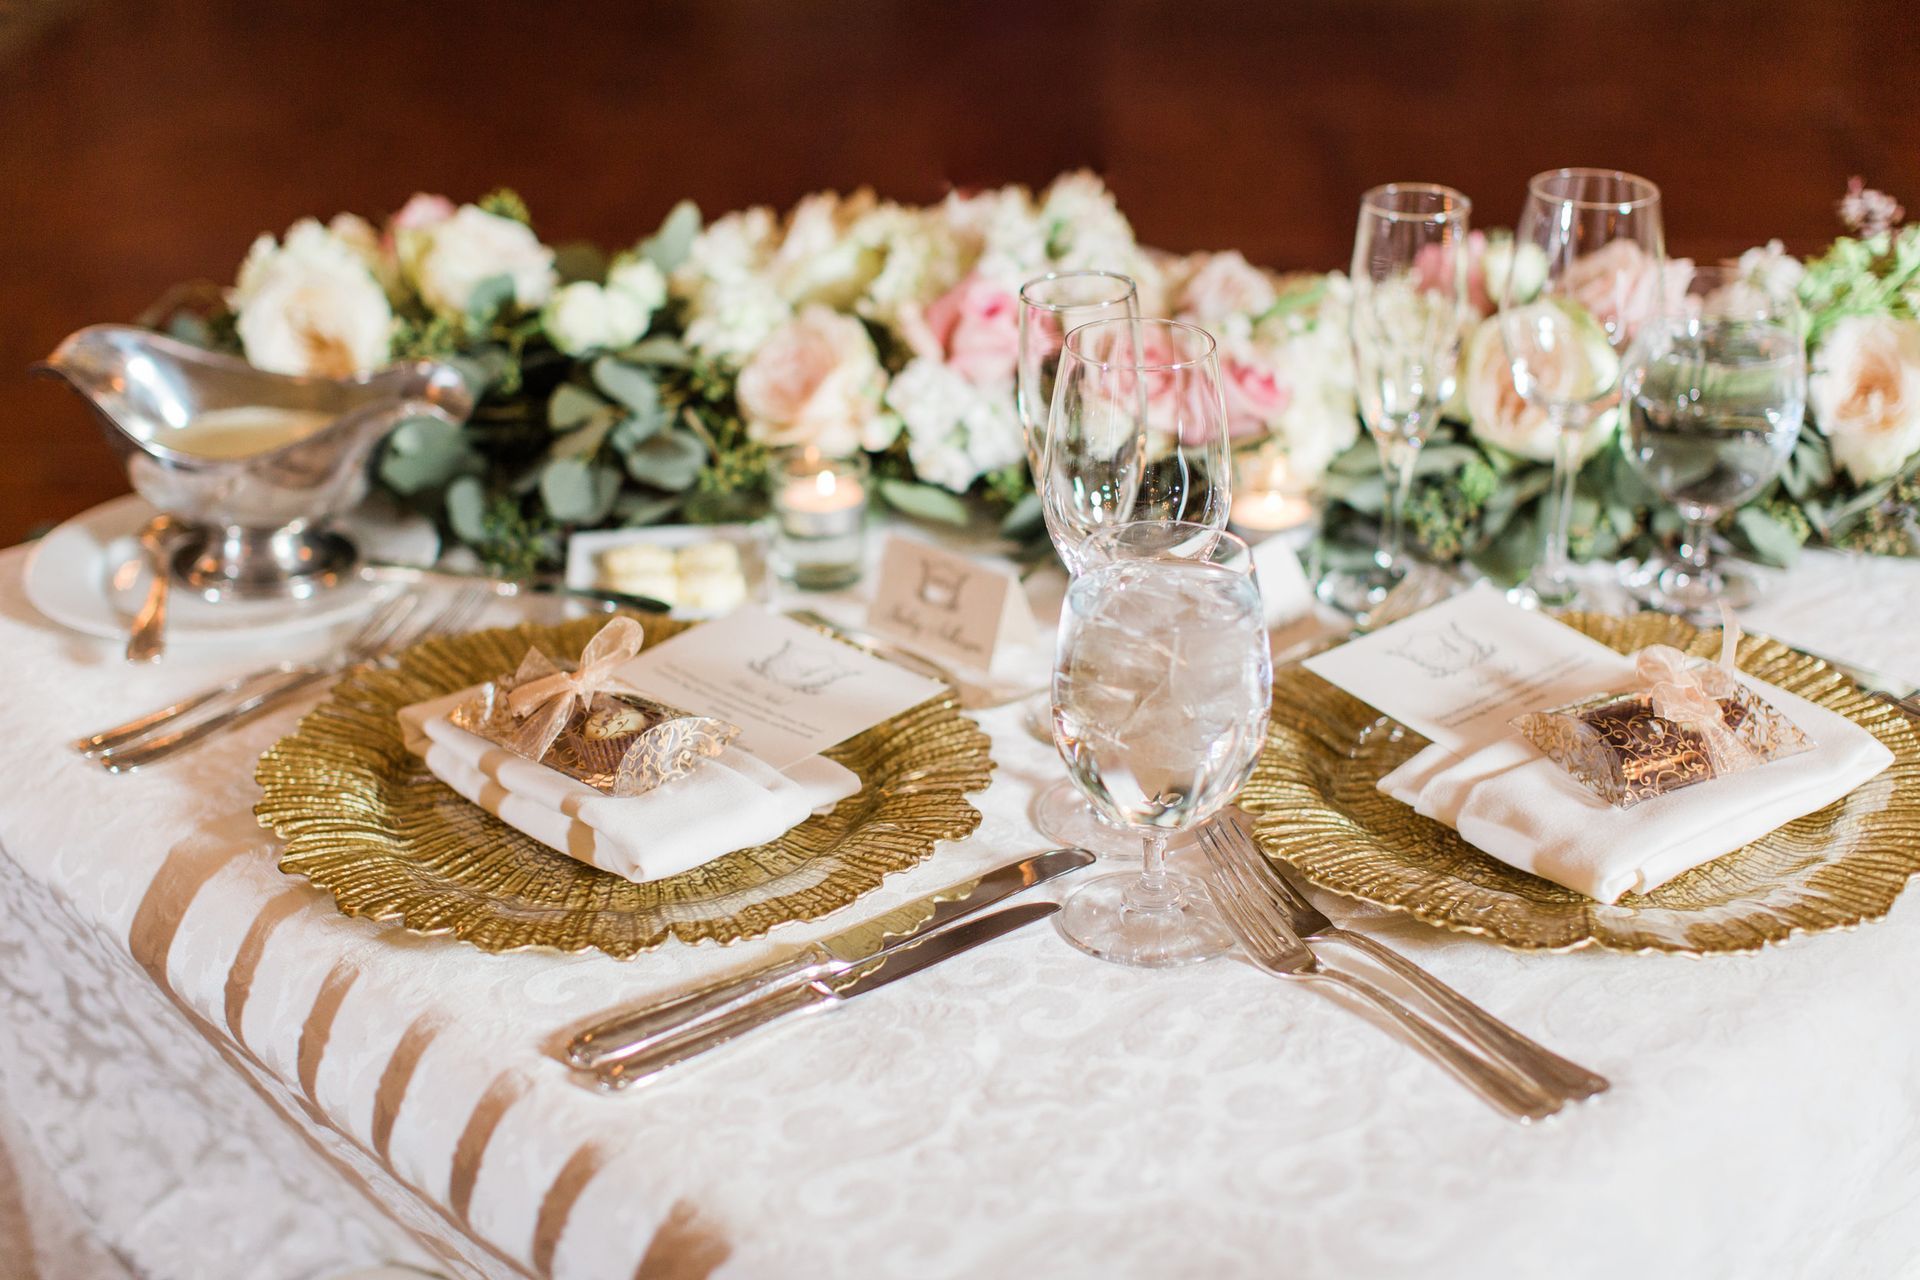 Bailey and Sam’s Wedding table set for their wedding reception with plates, utensils, and flowers by Wedding Planner Nashville